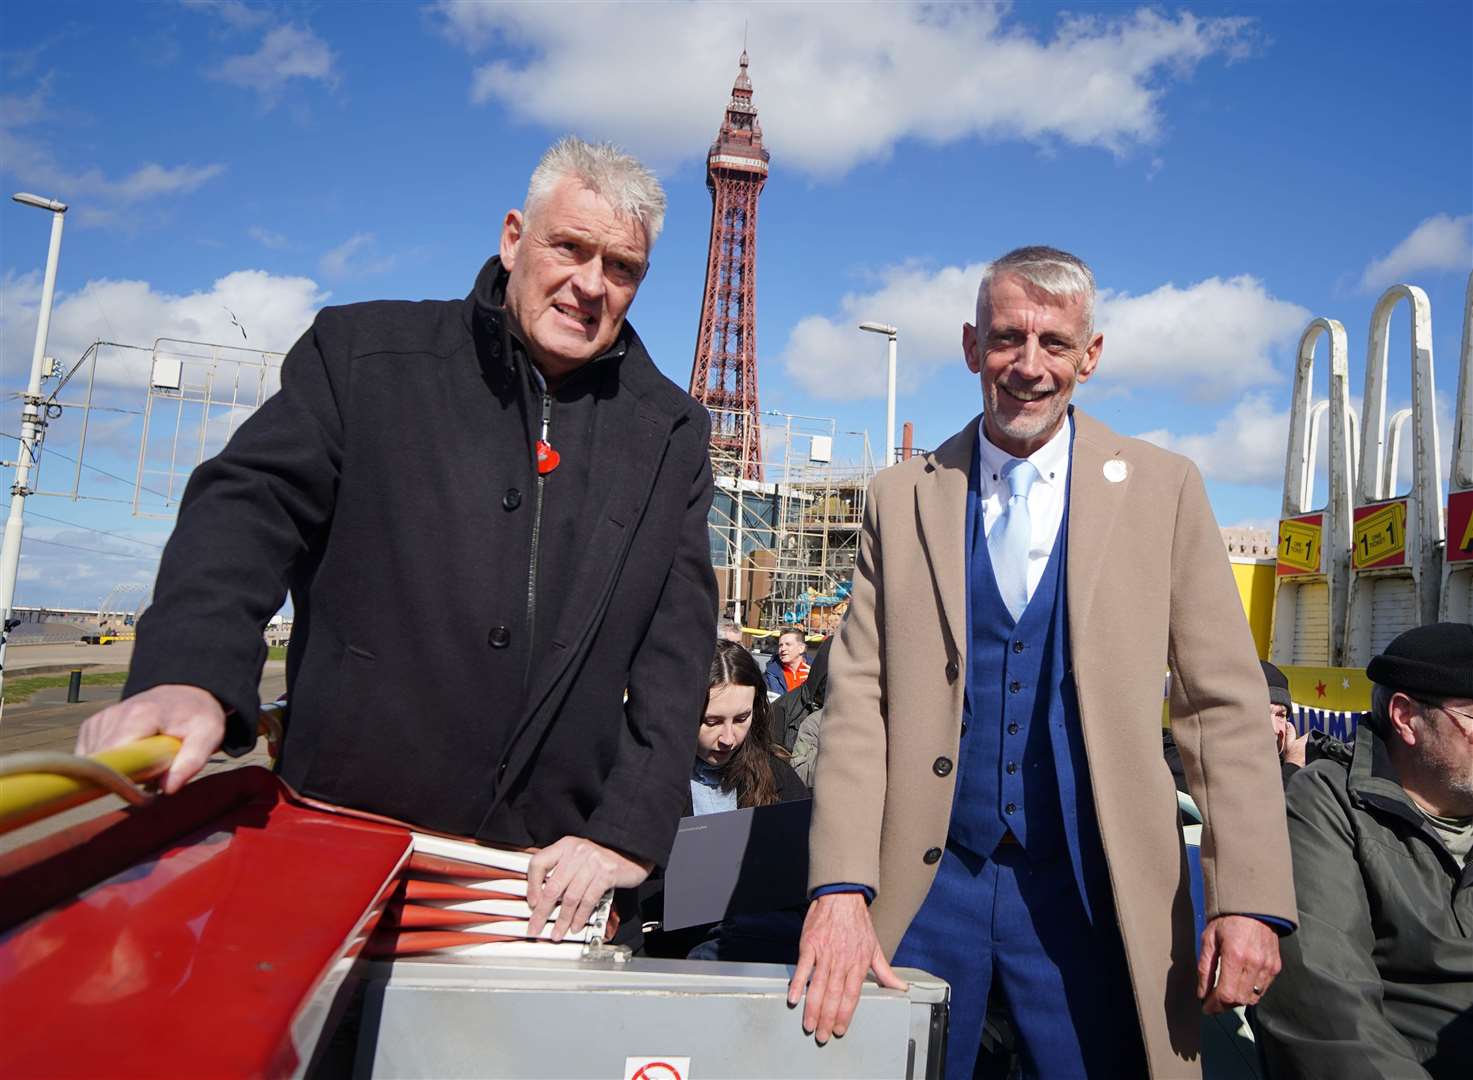 Lee Anderson, left, and Mark Butcher travel through Blackpool on an open top bus during a campaign event (Peter Byrne/PA)